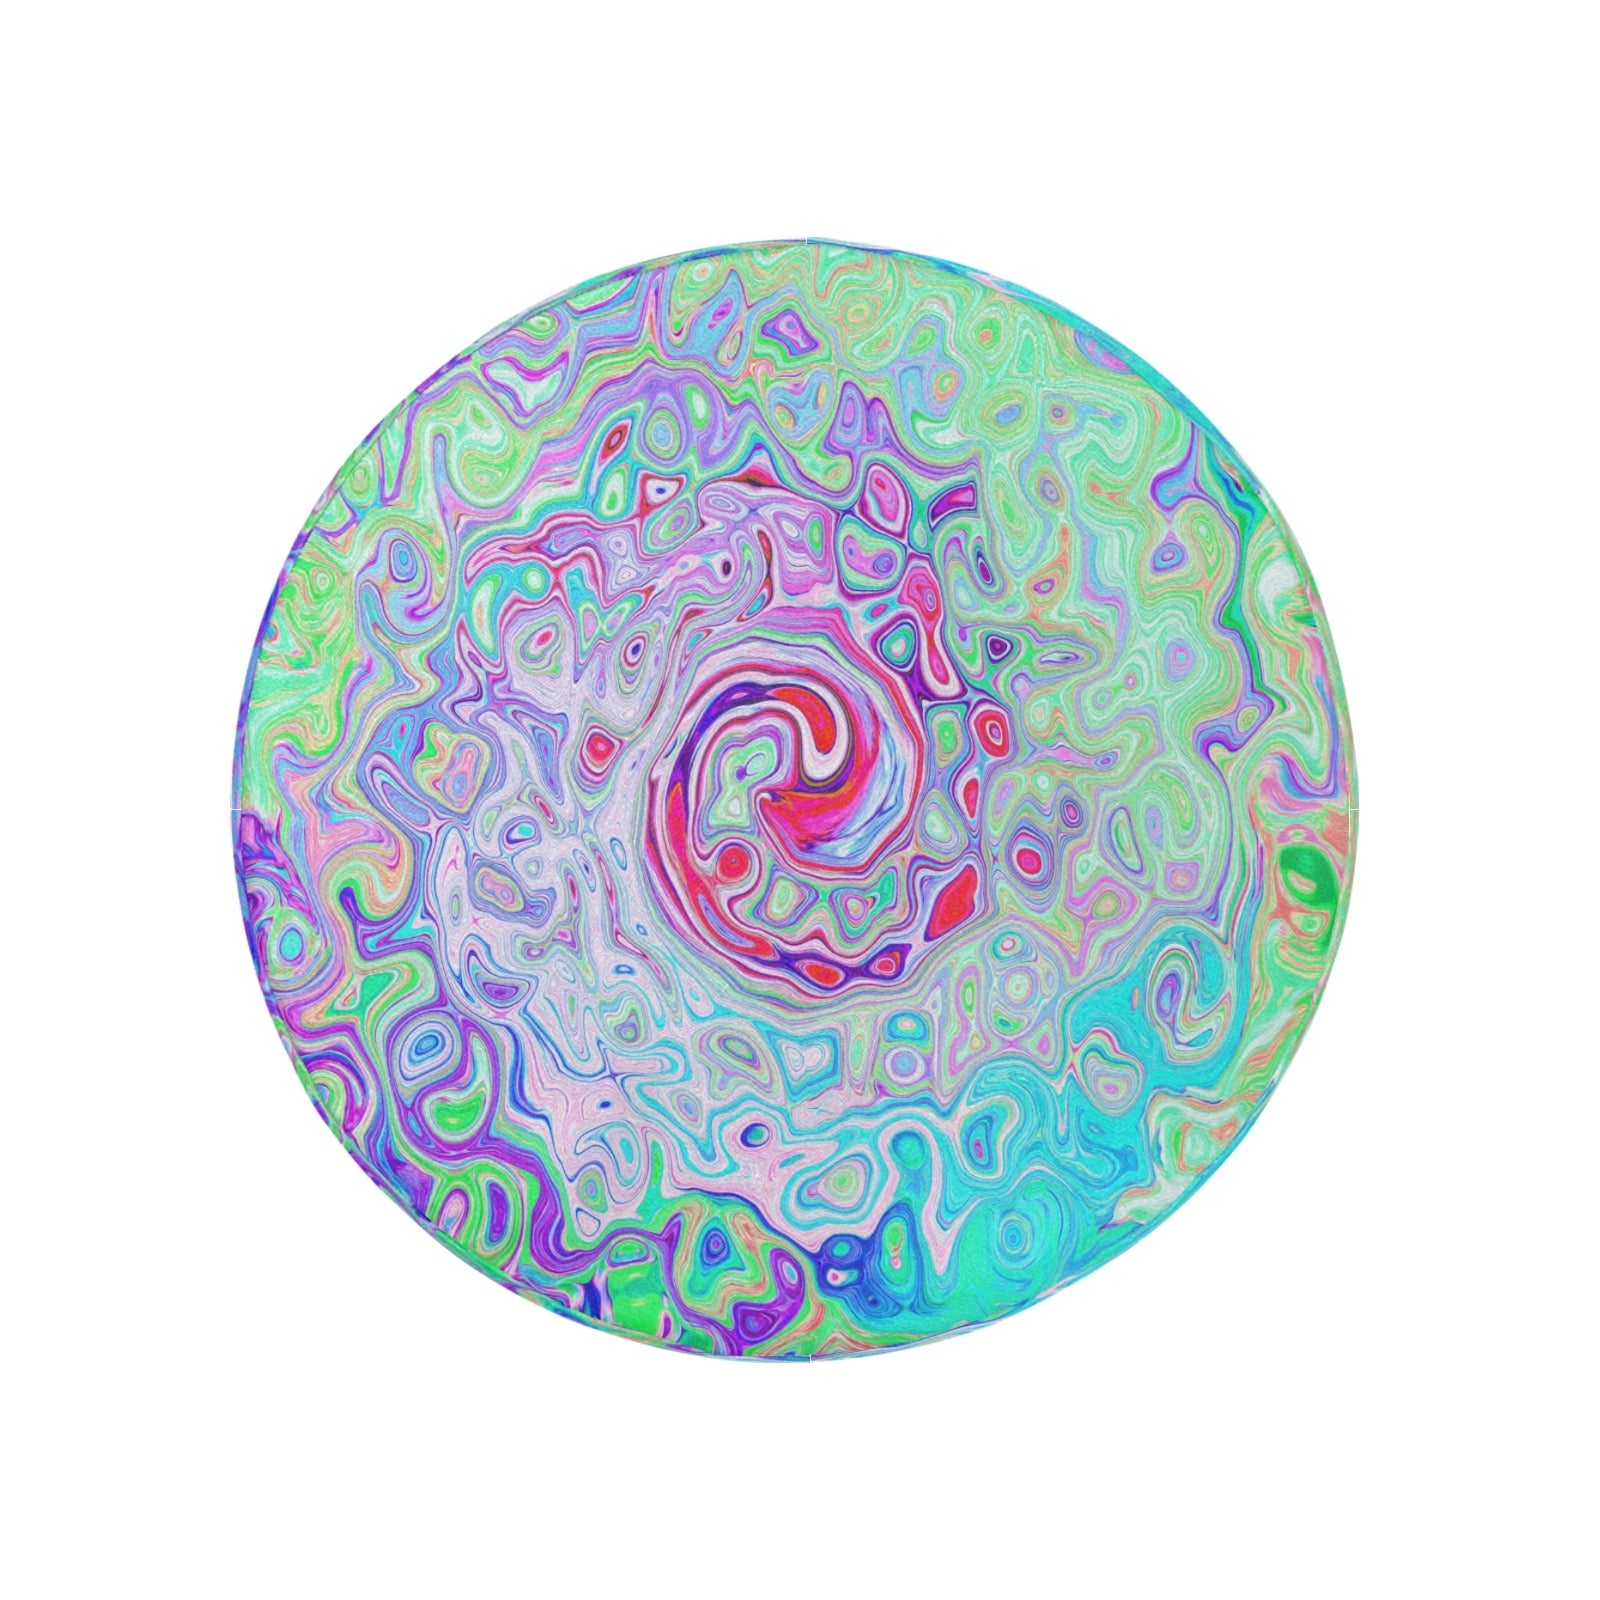 Spare Tire Covers, Groovy Abstract Retro Pink and Green Swirl - Medium